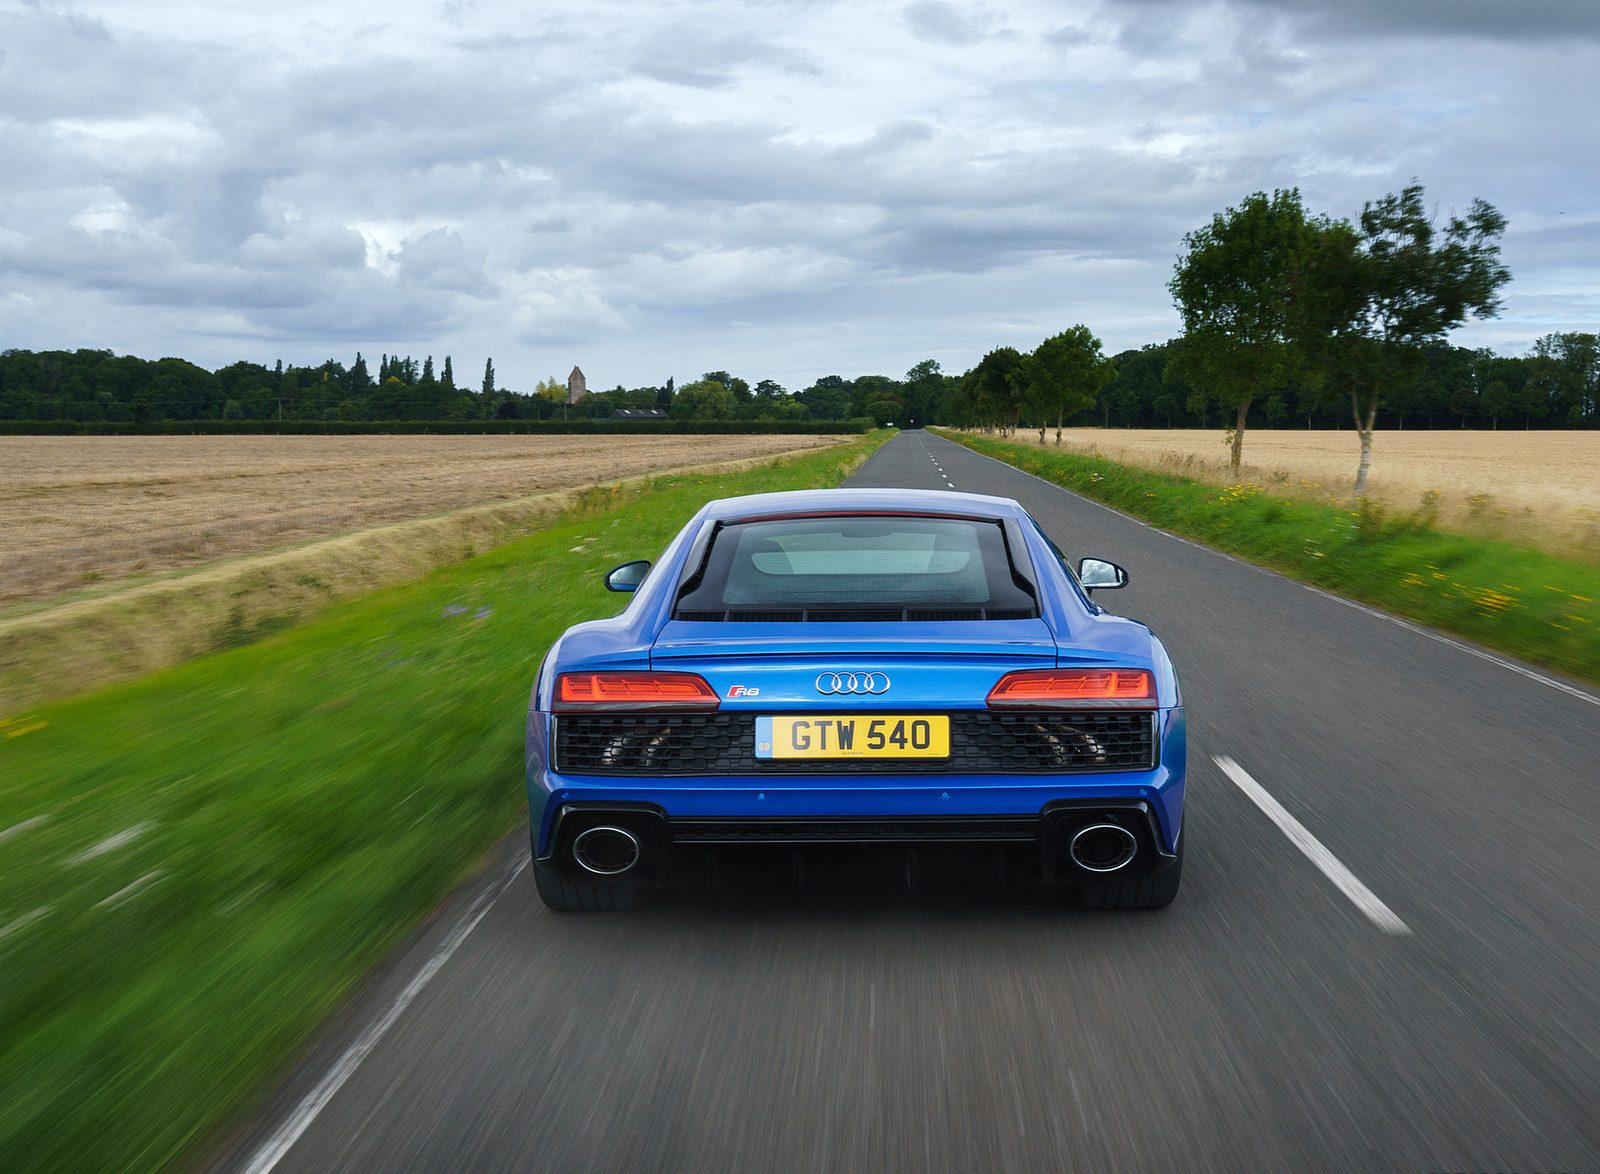 2020 Audi R8 V10 RWD Coupe (UK-Spec) Rear Wallpapers  #46 of 151